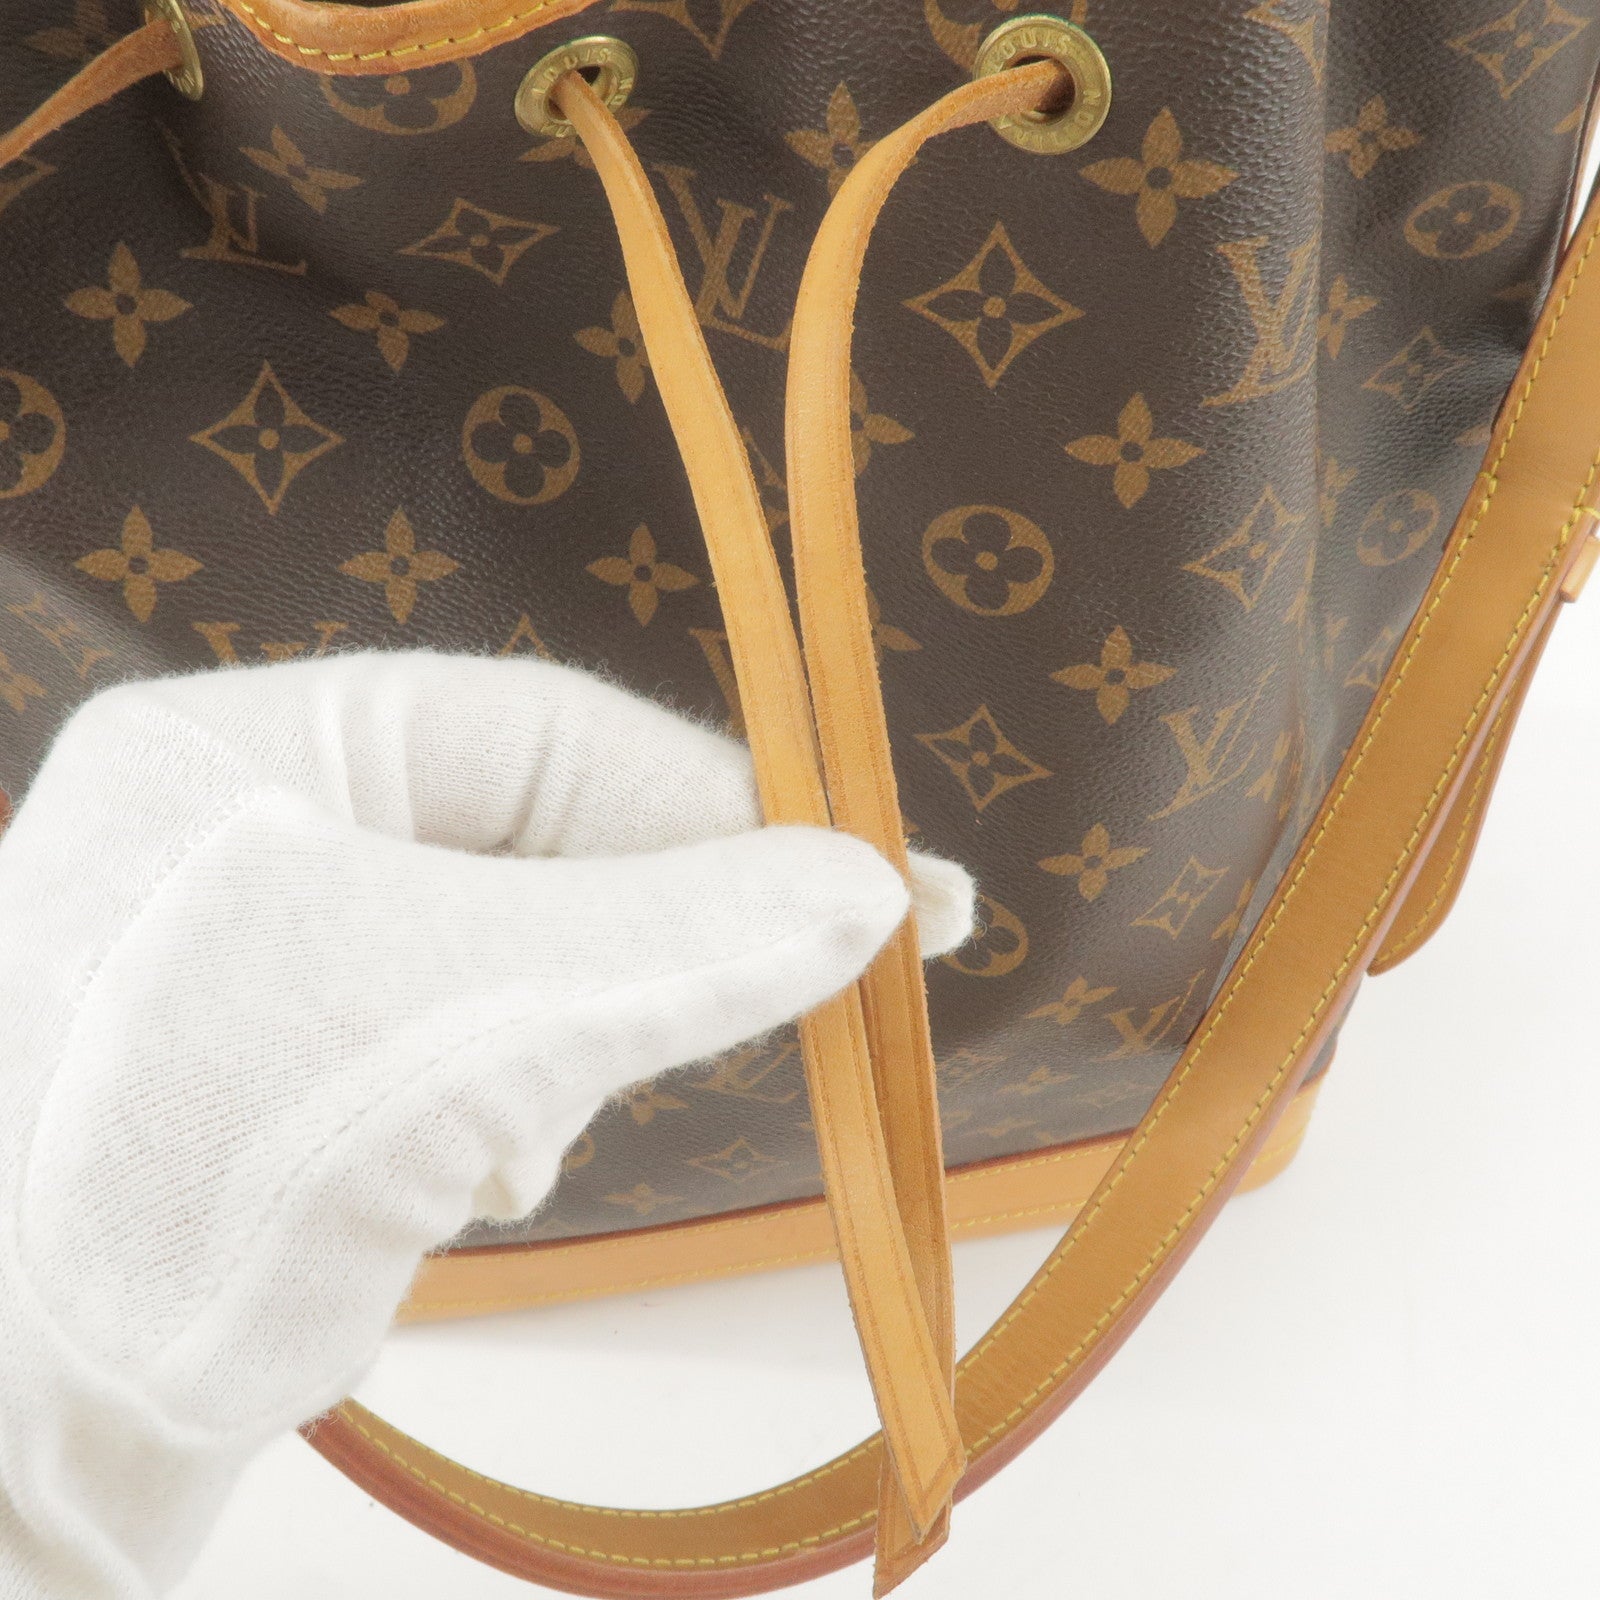 Bags, Louis Vuitton Robusto Briefcase Epi Leather Like New Condition